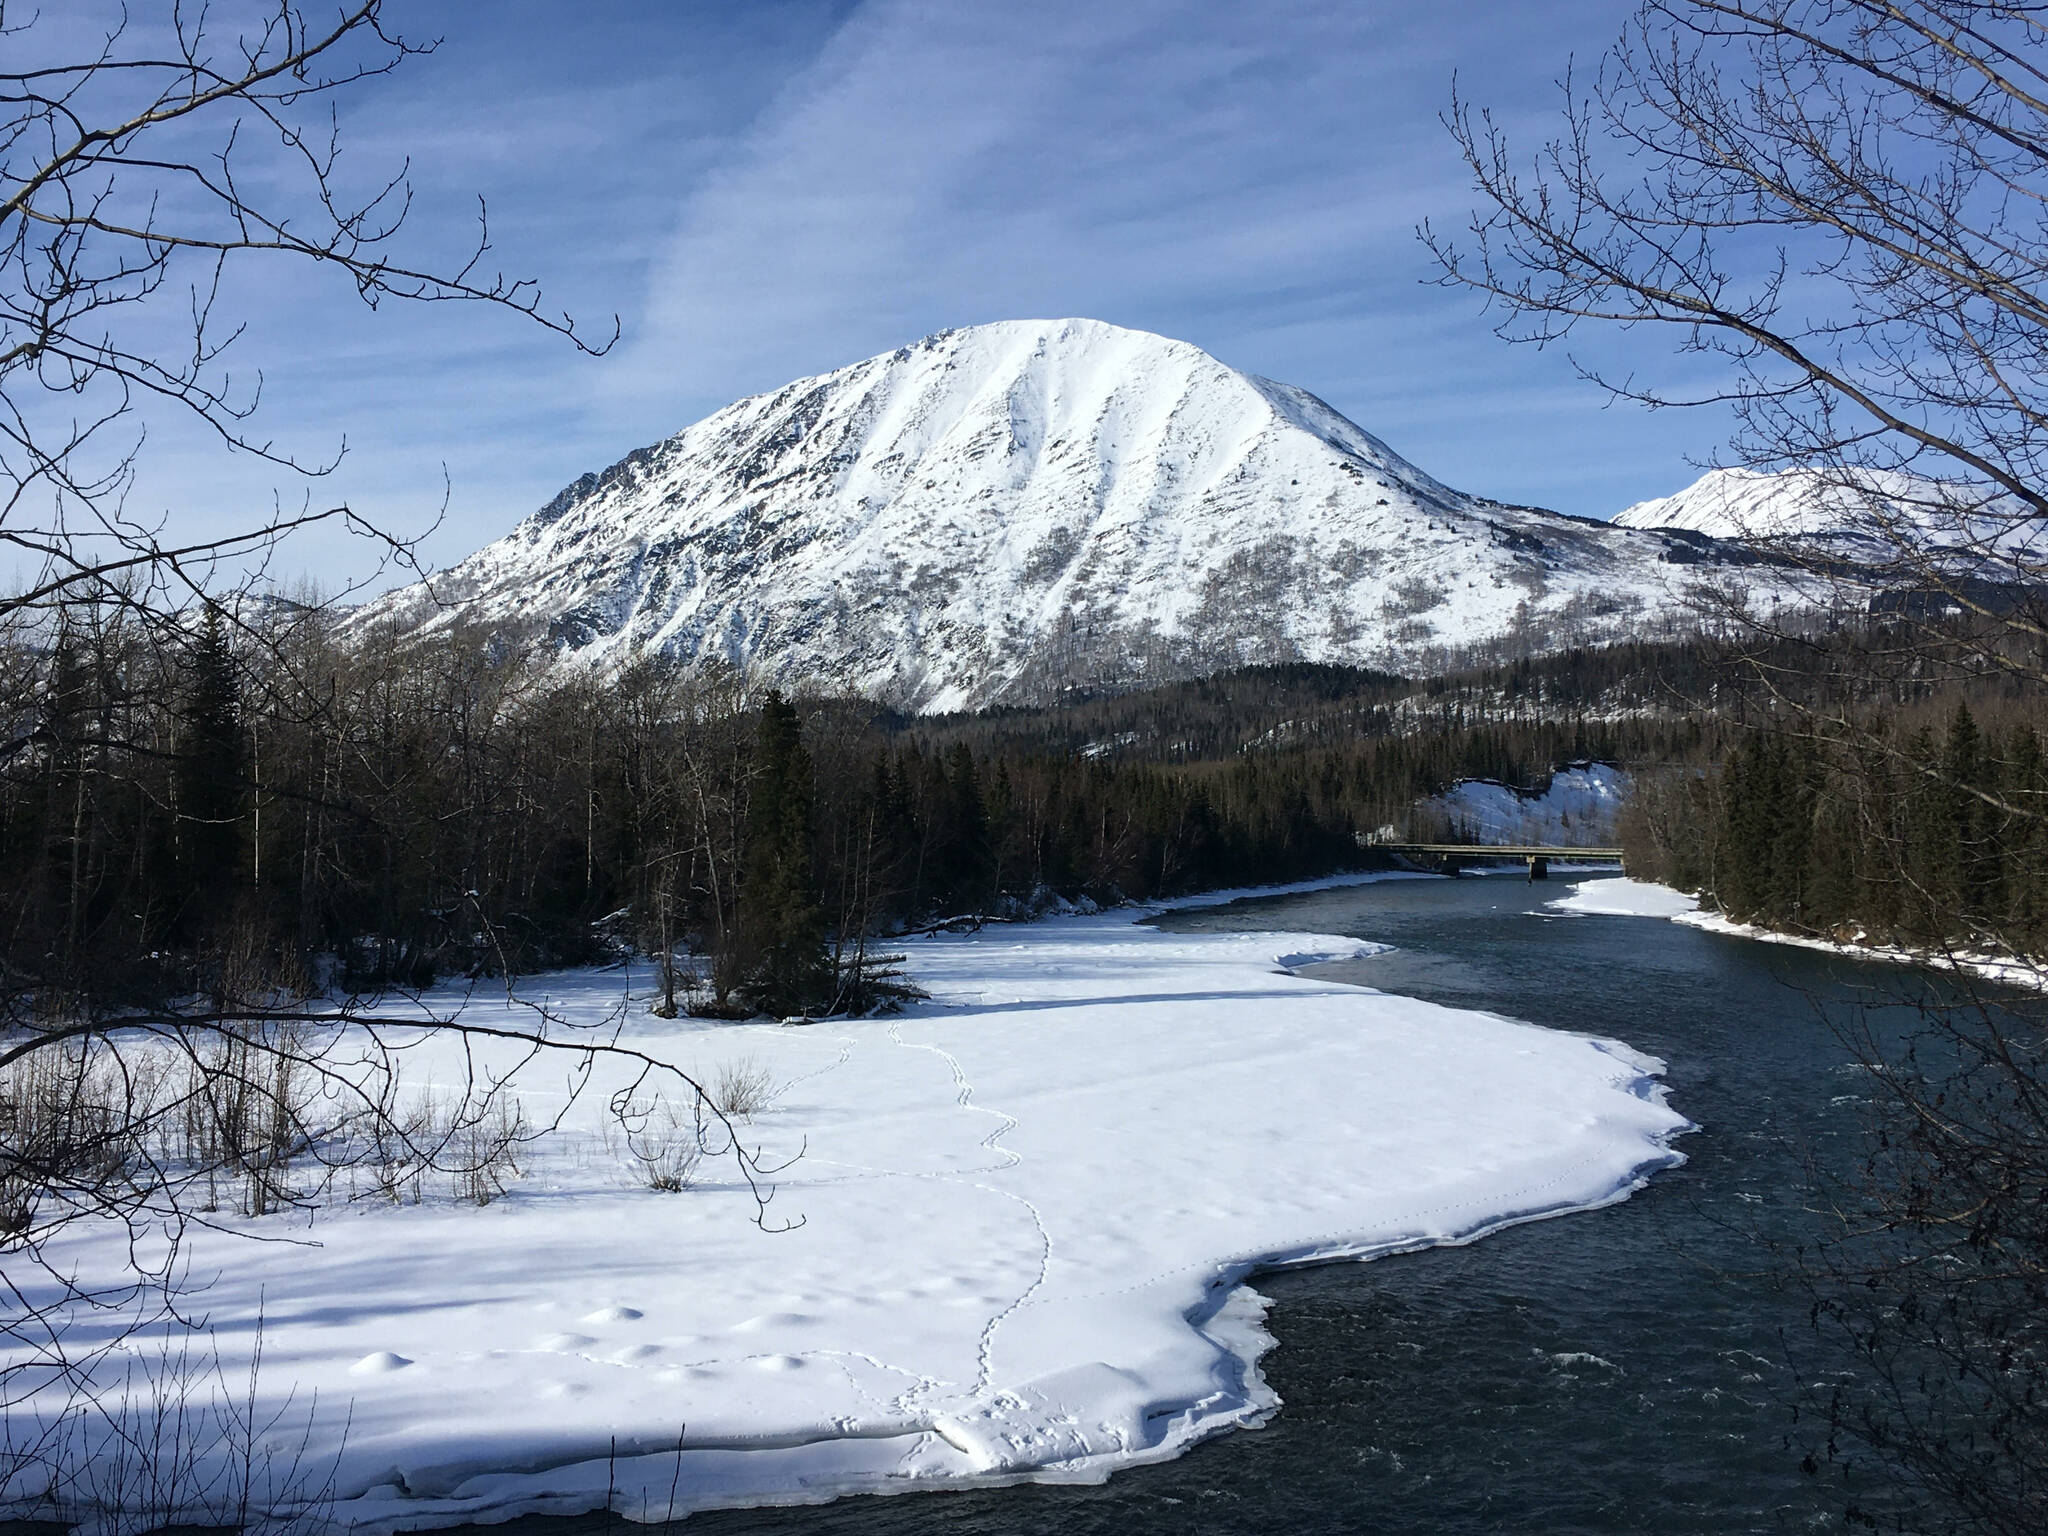 The Sterling Highway crosses the Kenai River near the Russian River Campground on March 15, 2020 near Cooper Landing, Alaska. (Jeff Helminiak/Peninsula Clarion)
The Sterling Highway crosses the Kenai River near the Russian River Campground on March 15, 2020, near Cooper Landing, Alaska. (Jeff Helminiak/Peninsula Clarion)